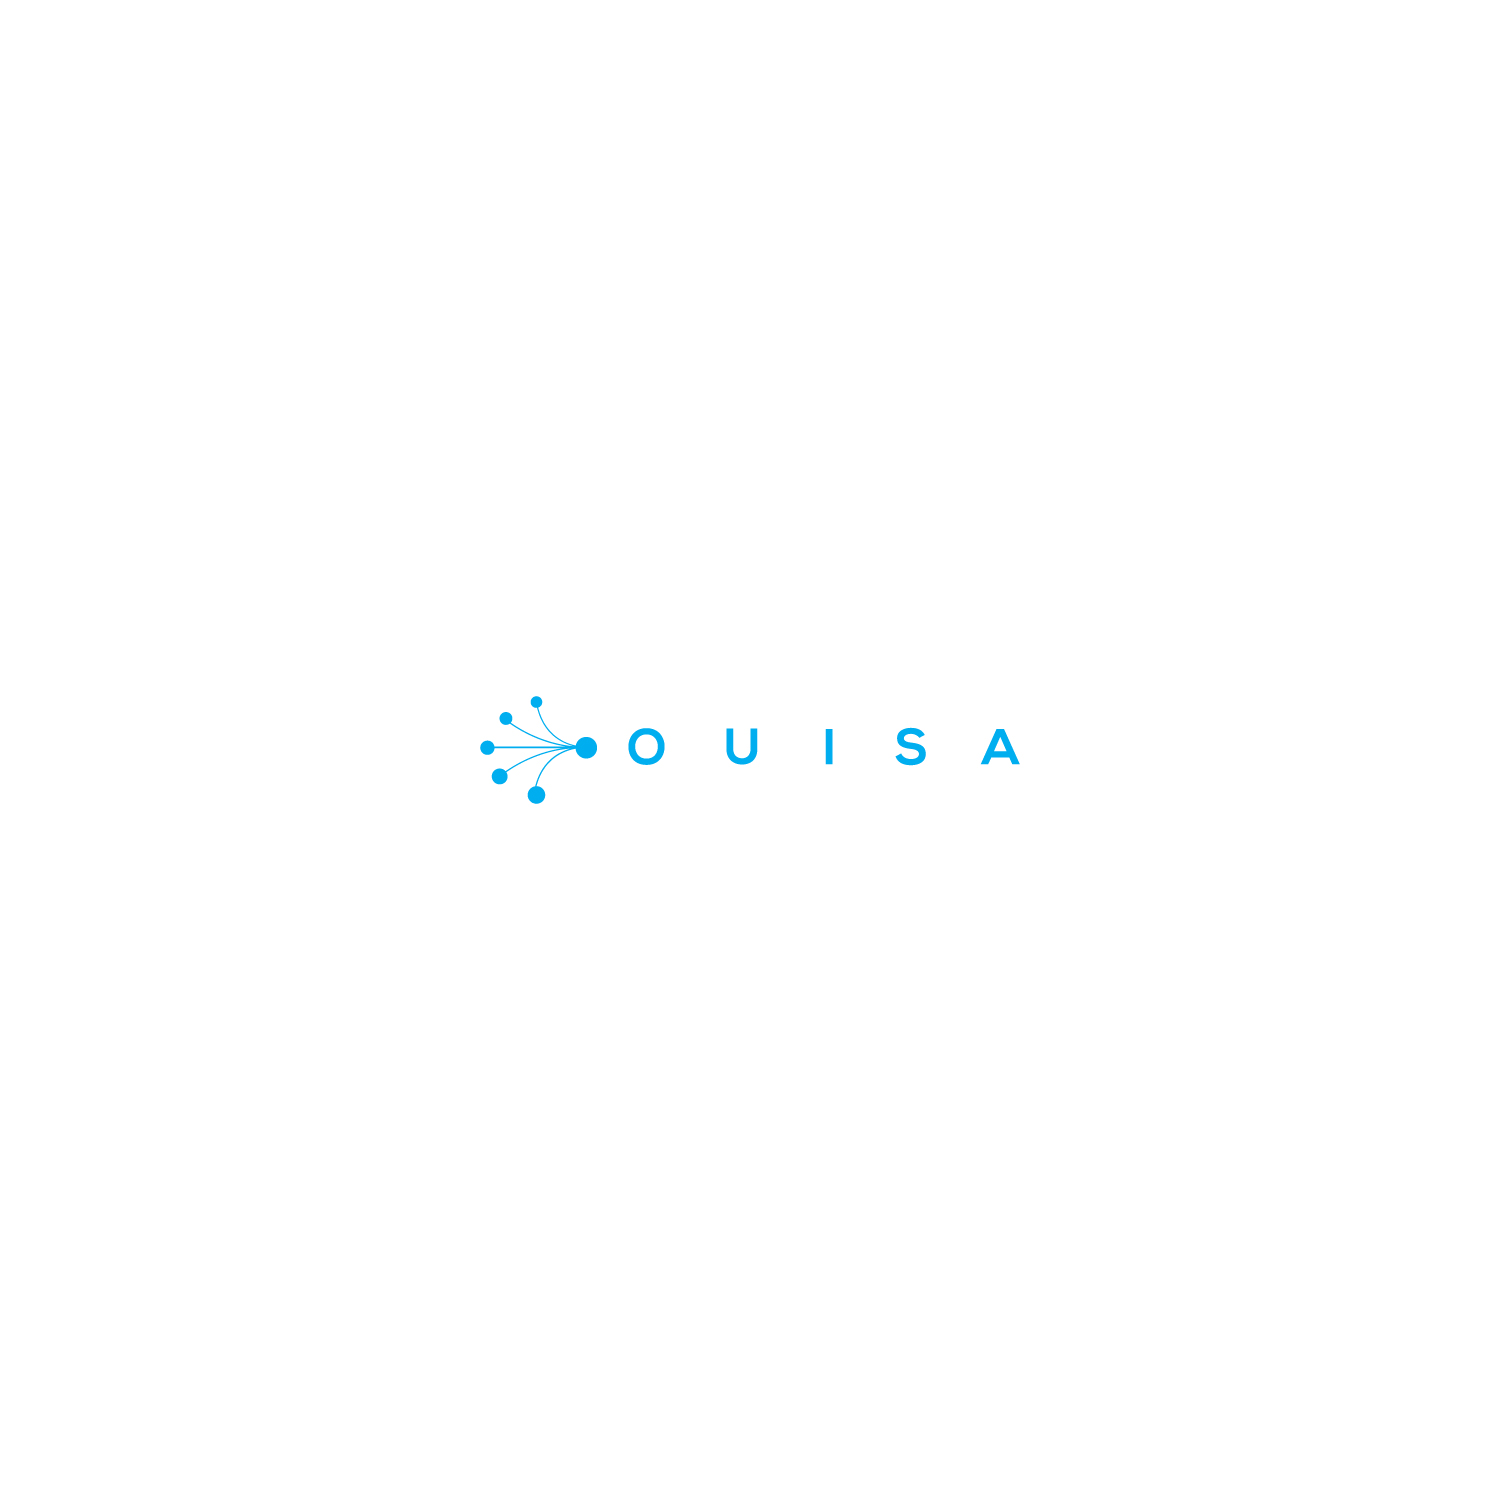 Vincent Molinari of Ouisa Capital- Rulemaking Petition Regarding the Regulation of Digital Assets and Blockchain Technology